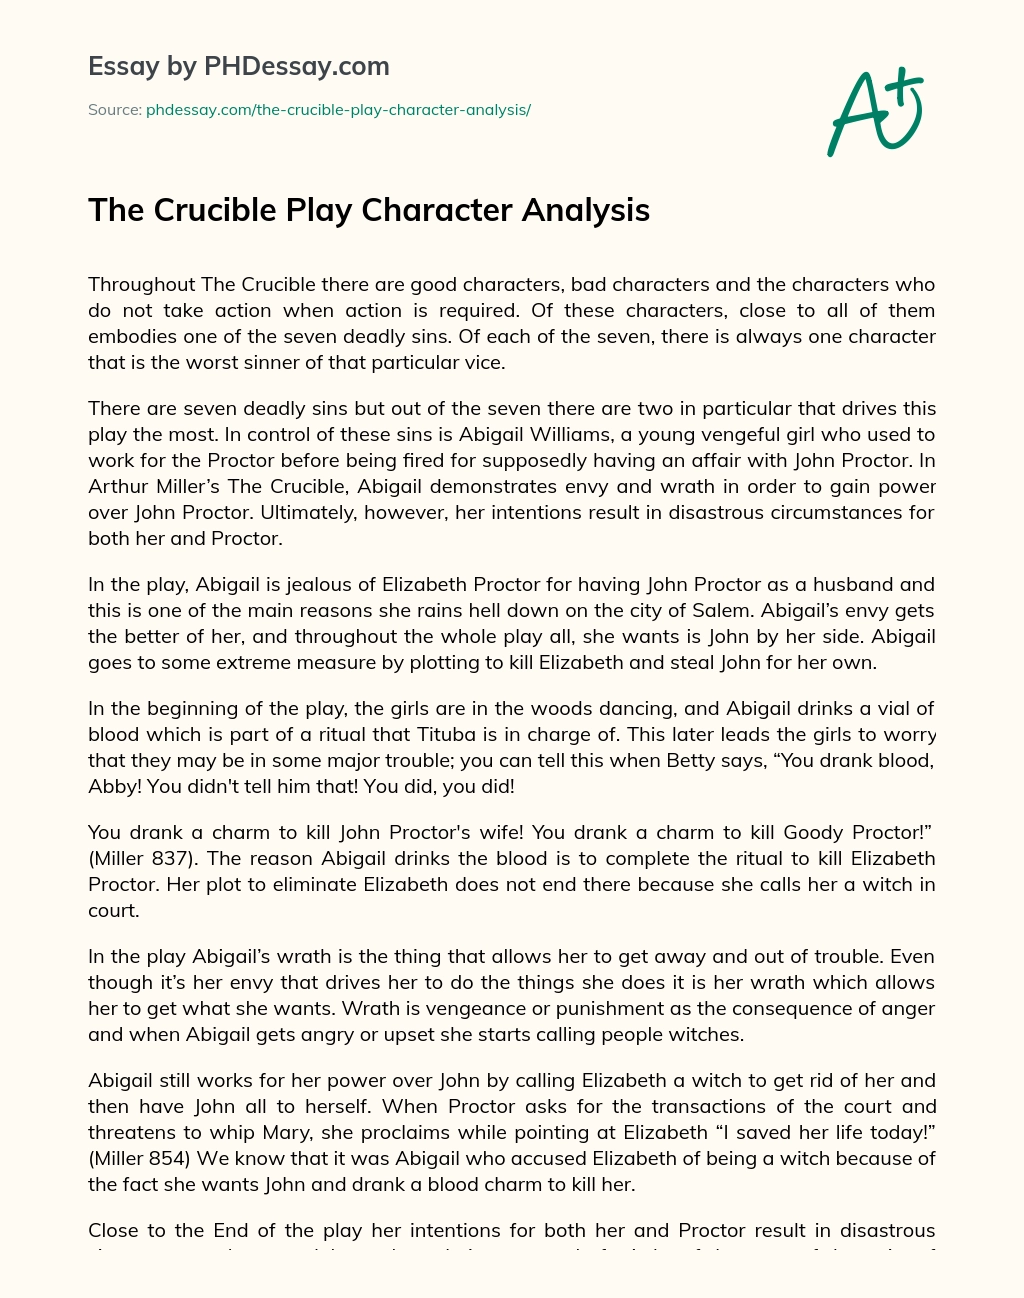 The Crucible Play Character Analysis essay